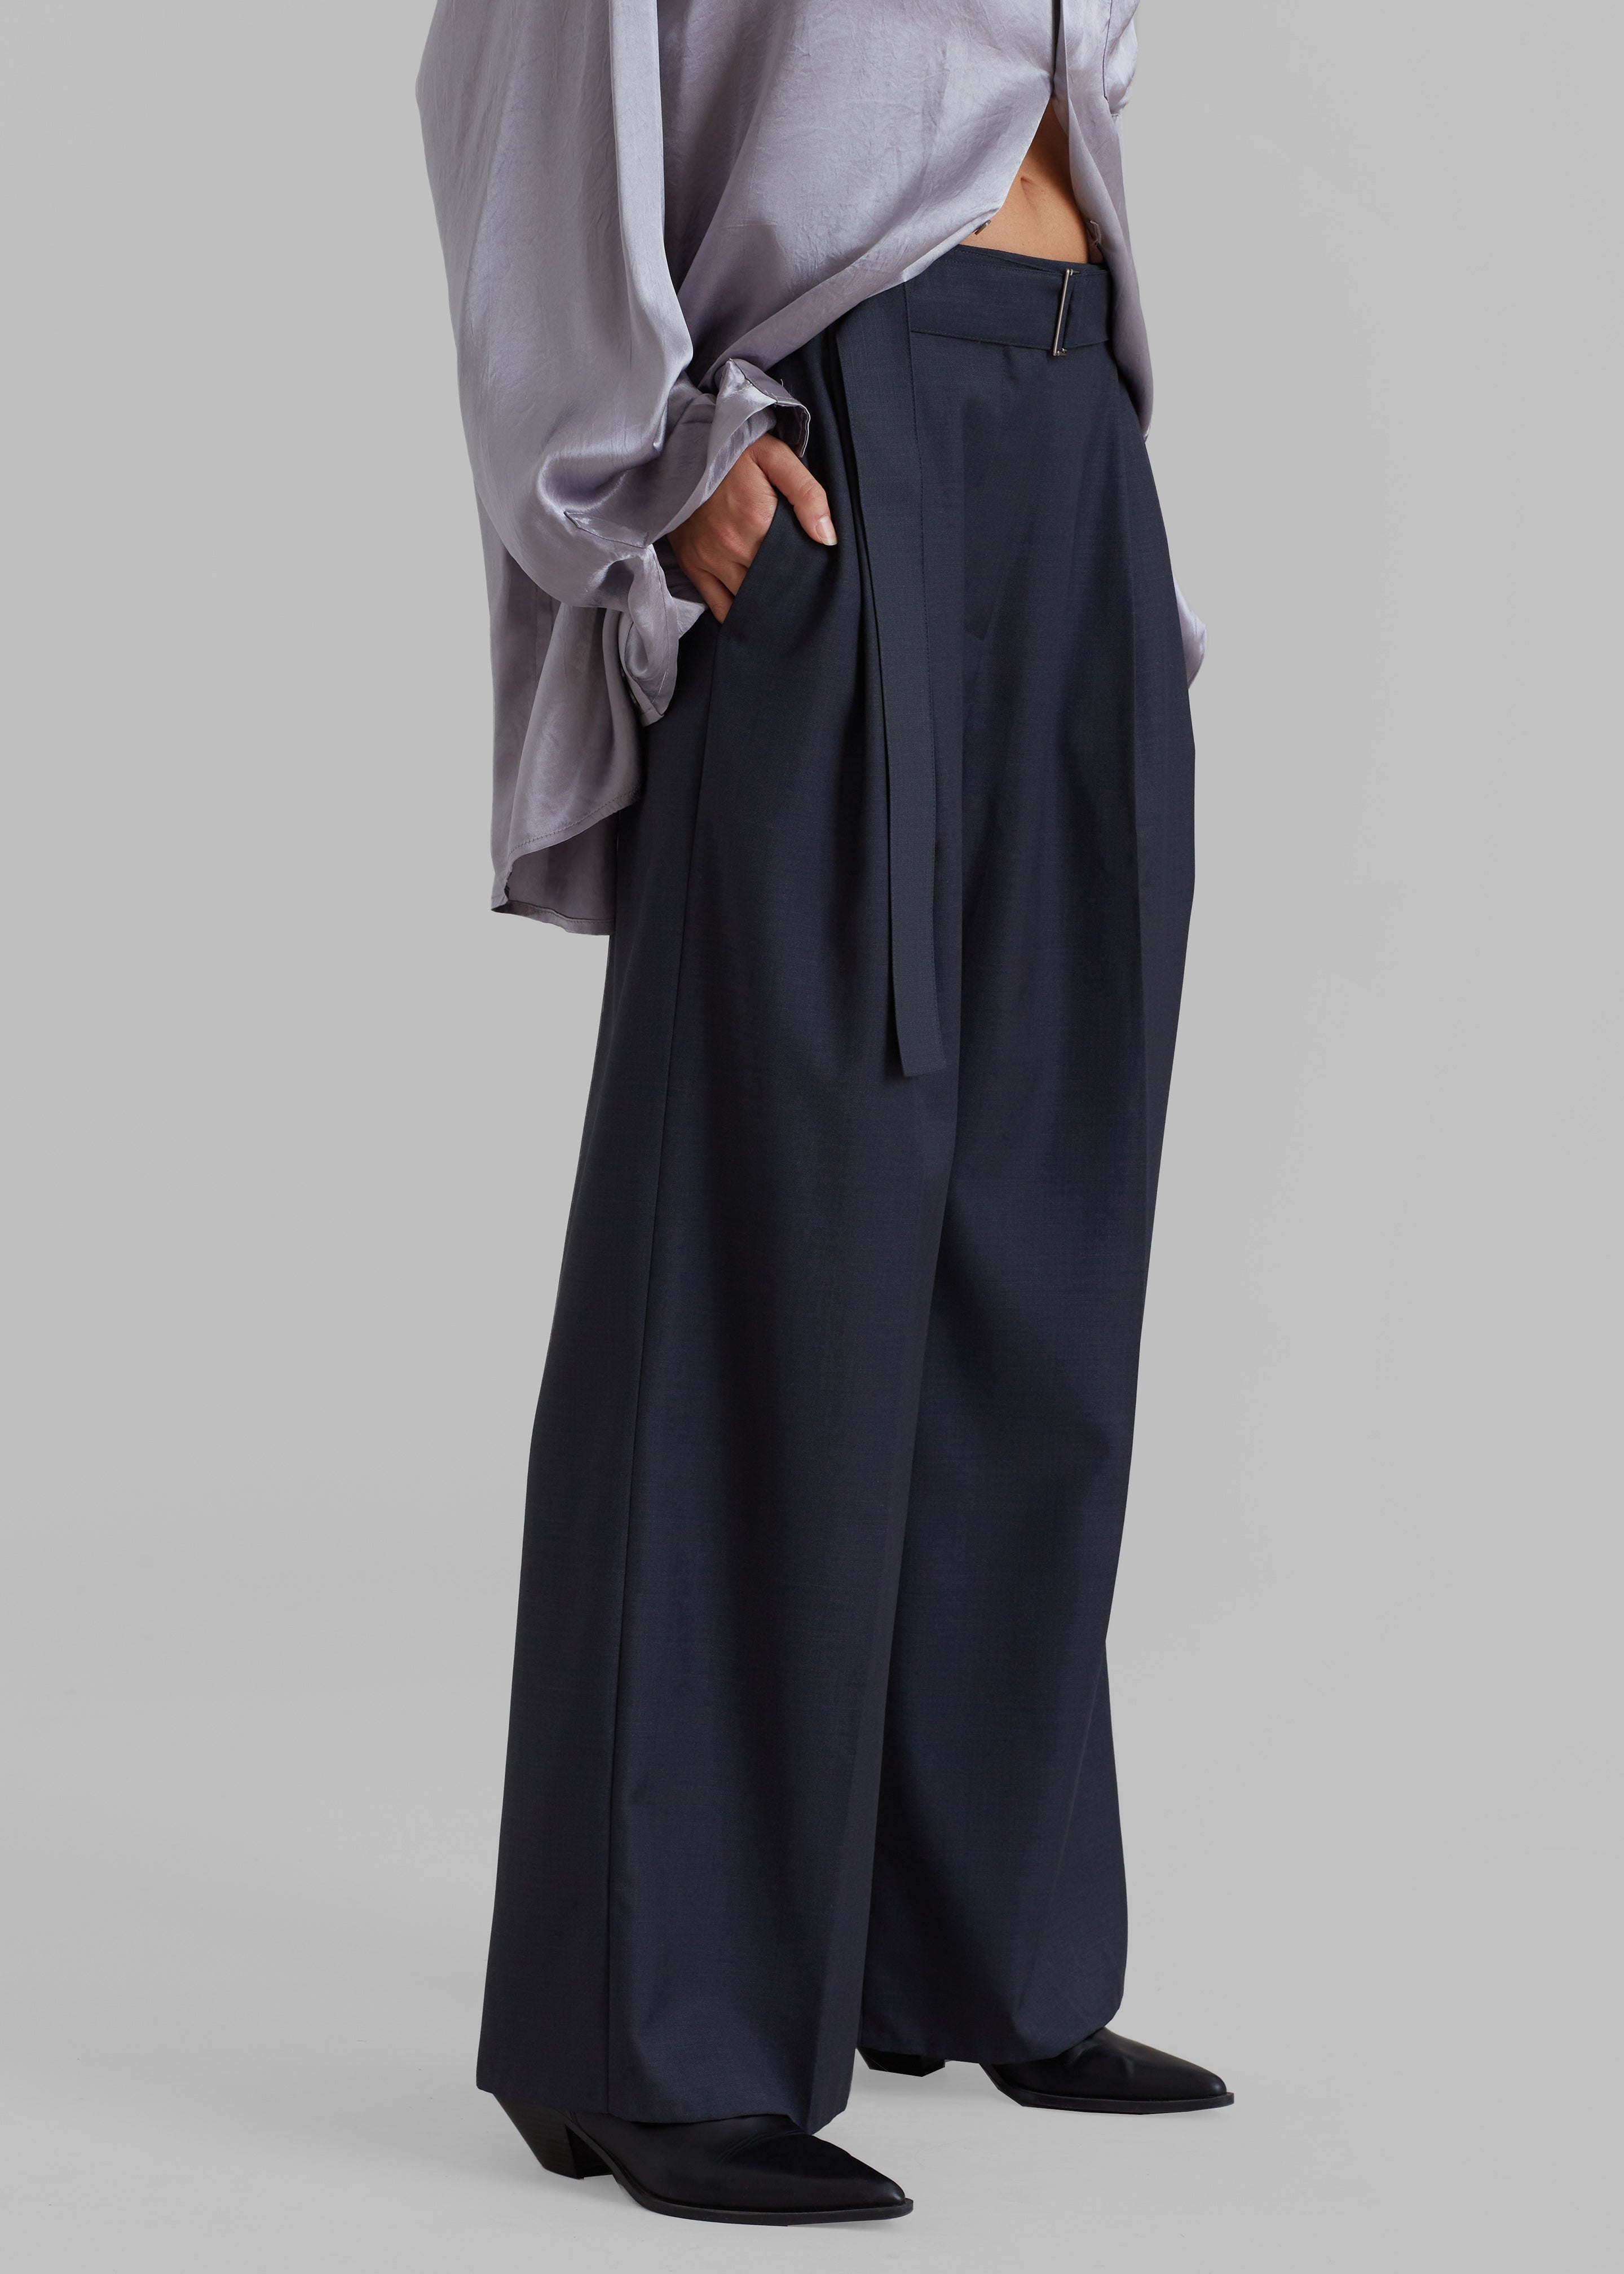 Lyxe Belted Pants - Charcoal - 1